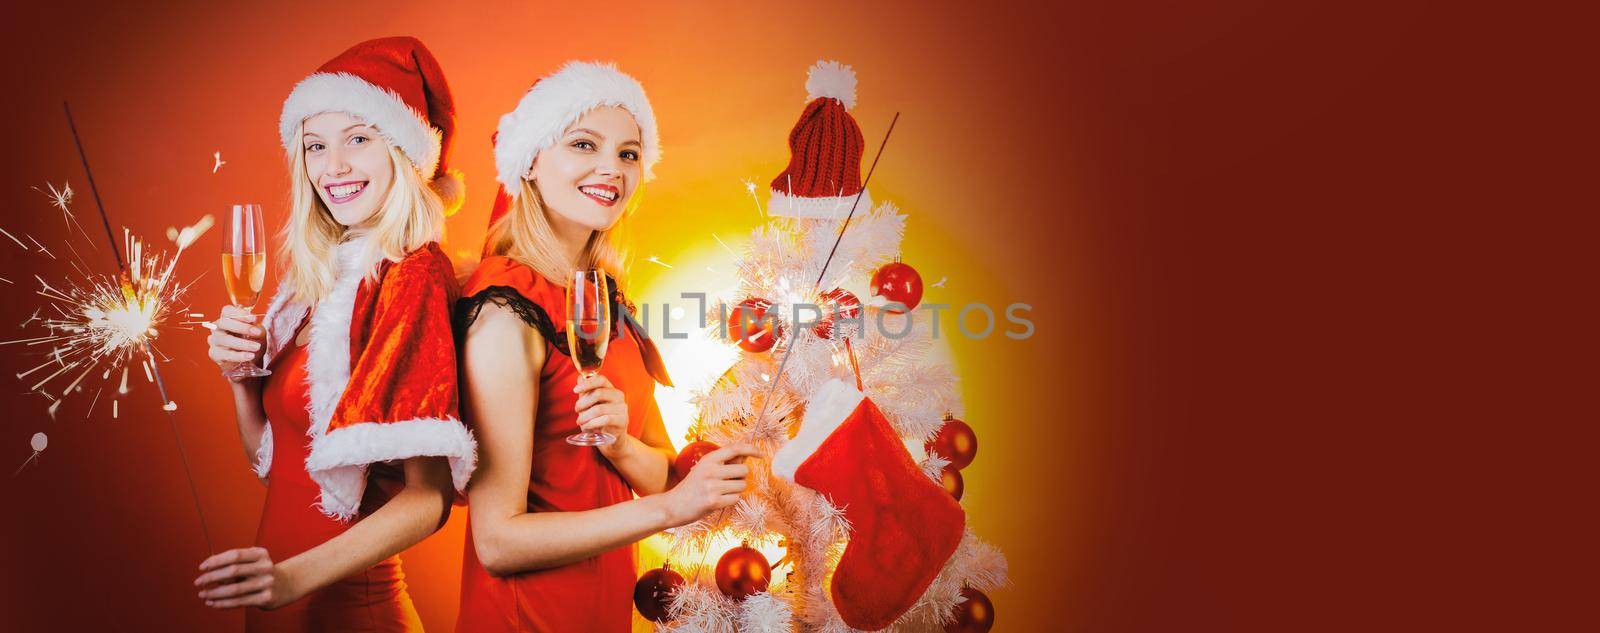 Christmas banner with friends girls. Merry Christmas and Happy Holidays poster. Joyful friends celebrate christmas on red Background